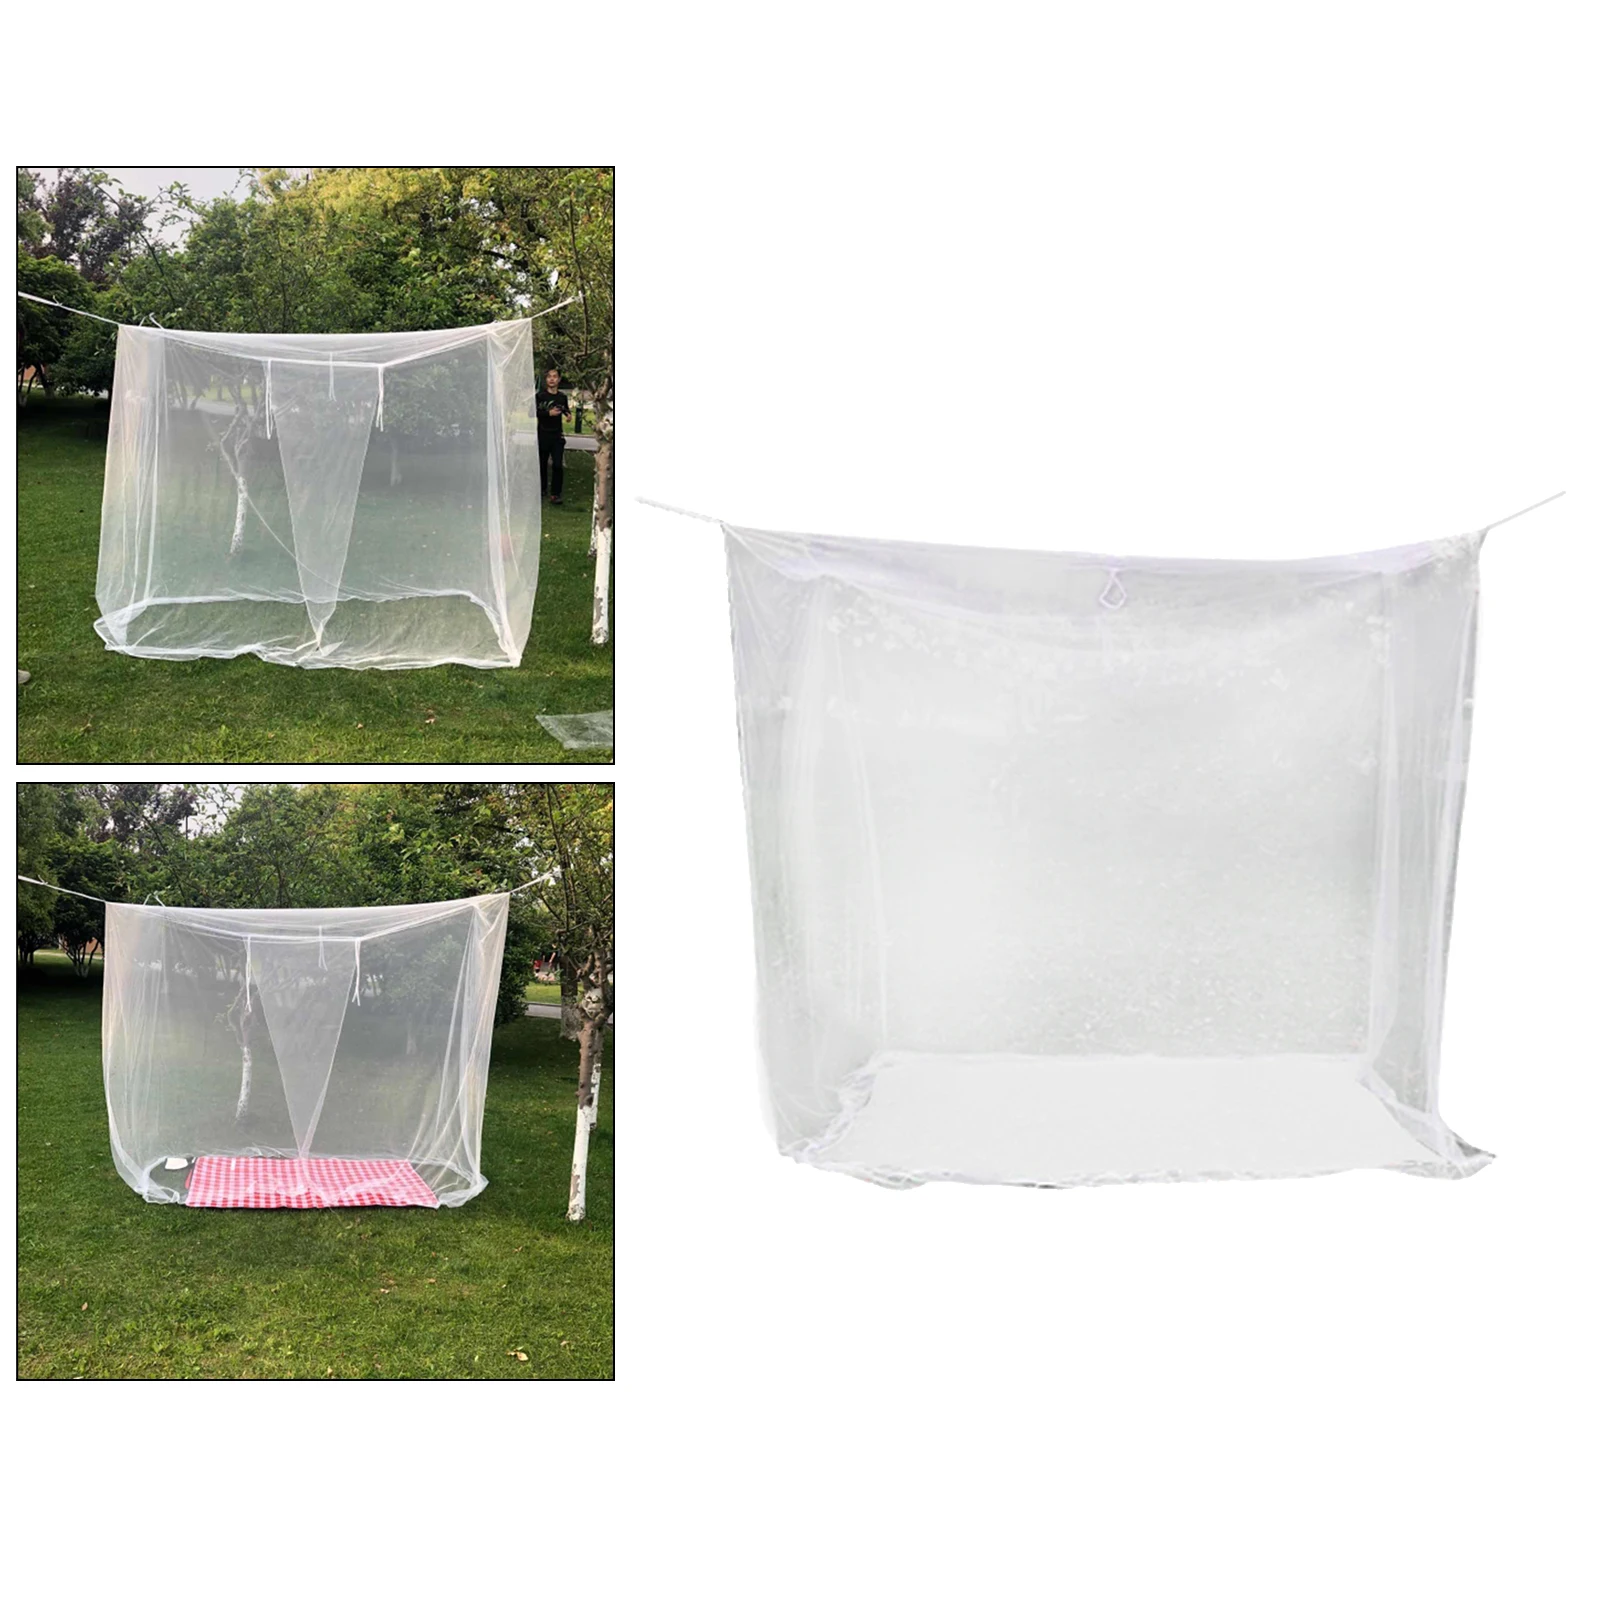  Netting Canopy Net White Dense Mesh Compact and Lightweight Camping Hiking Outdoor Net